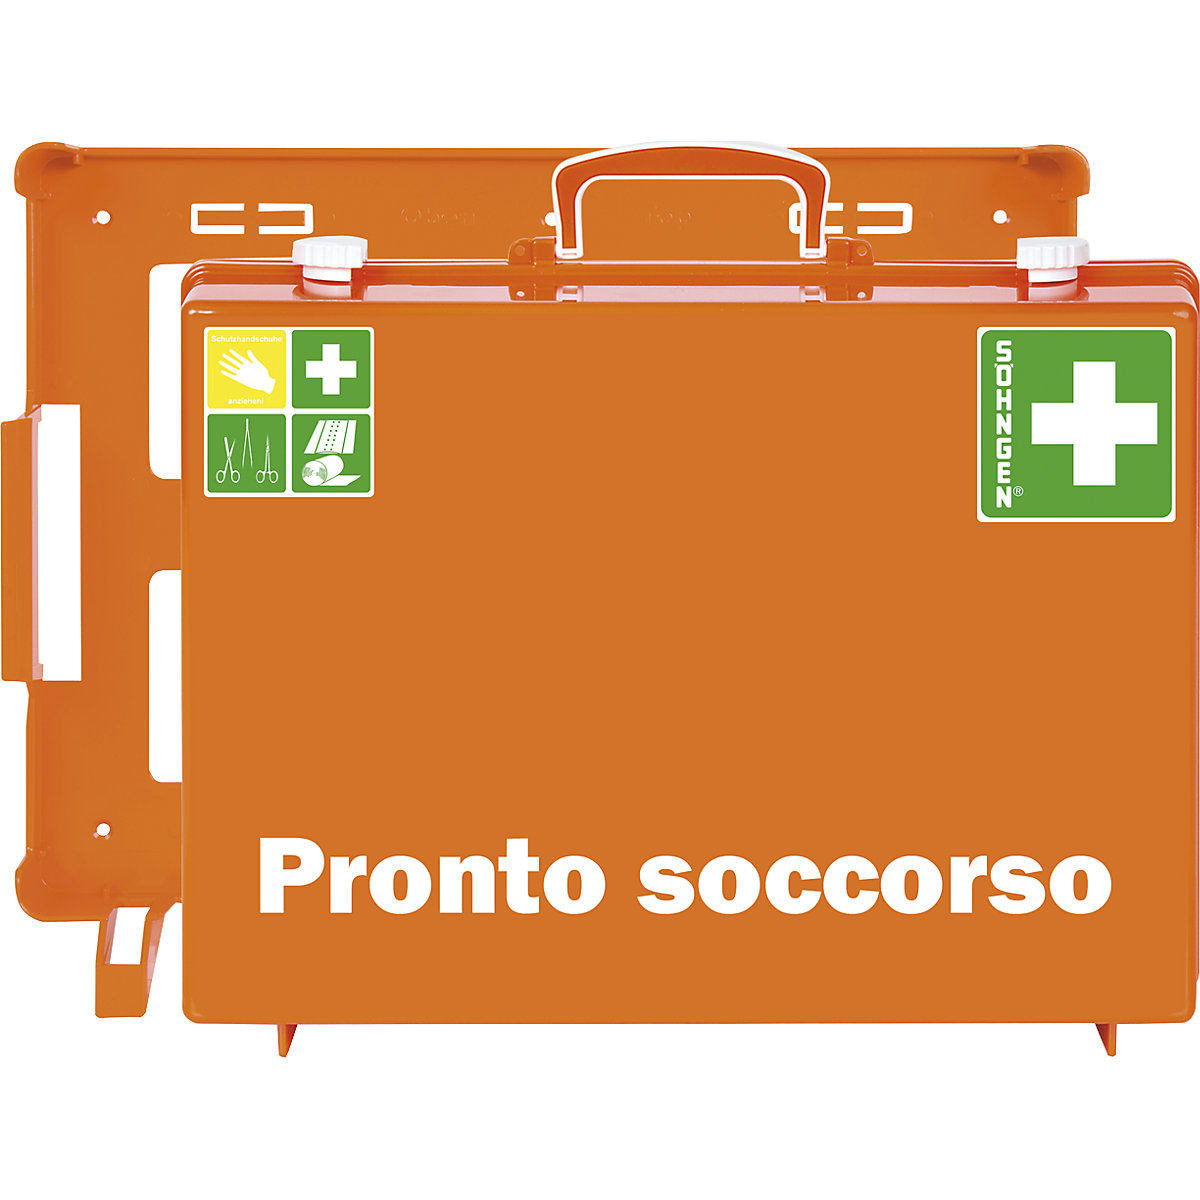 SÖHNGEN – First aid case, DIN 13169 compliant (Product illustration 10)